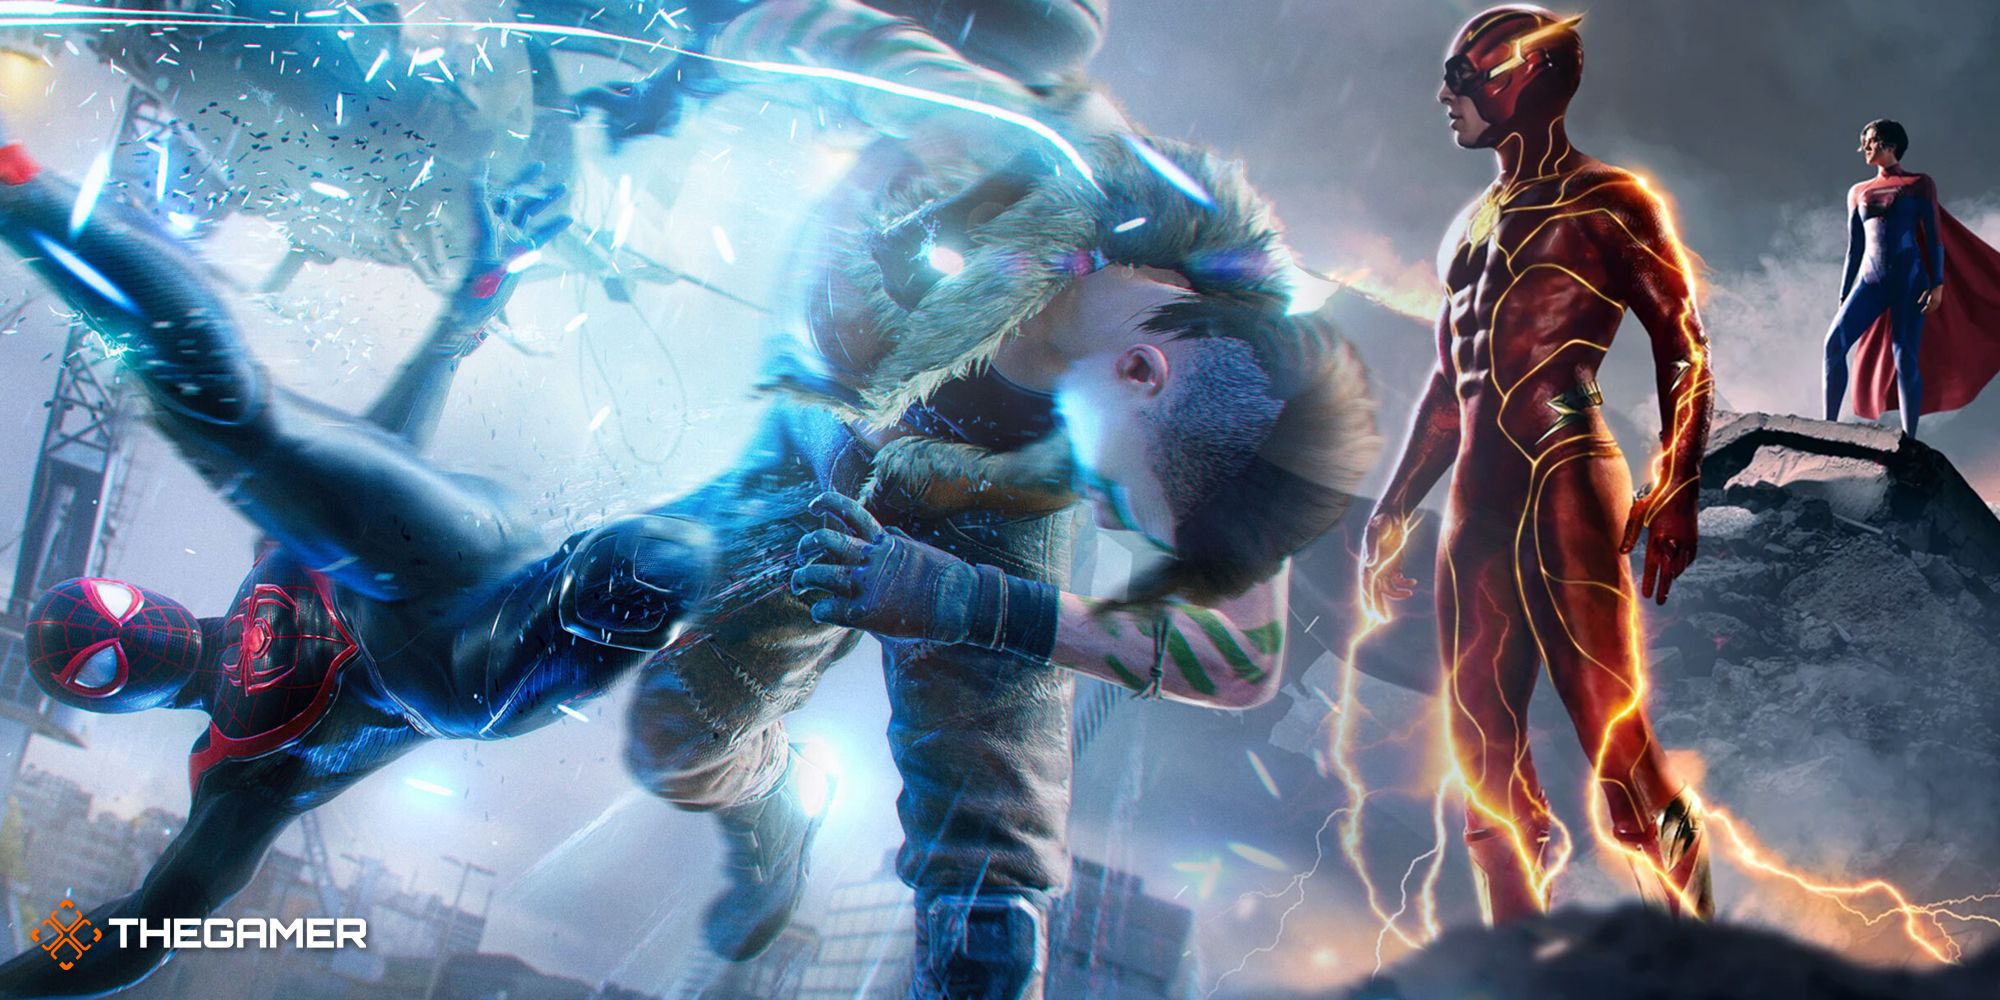 Miles Morales kicks an enemy on the left, with the Flash and Supergirl from The Flash poster standing on the right.